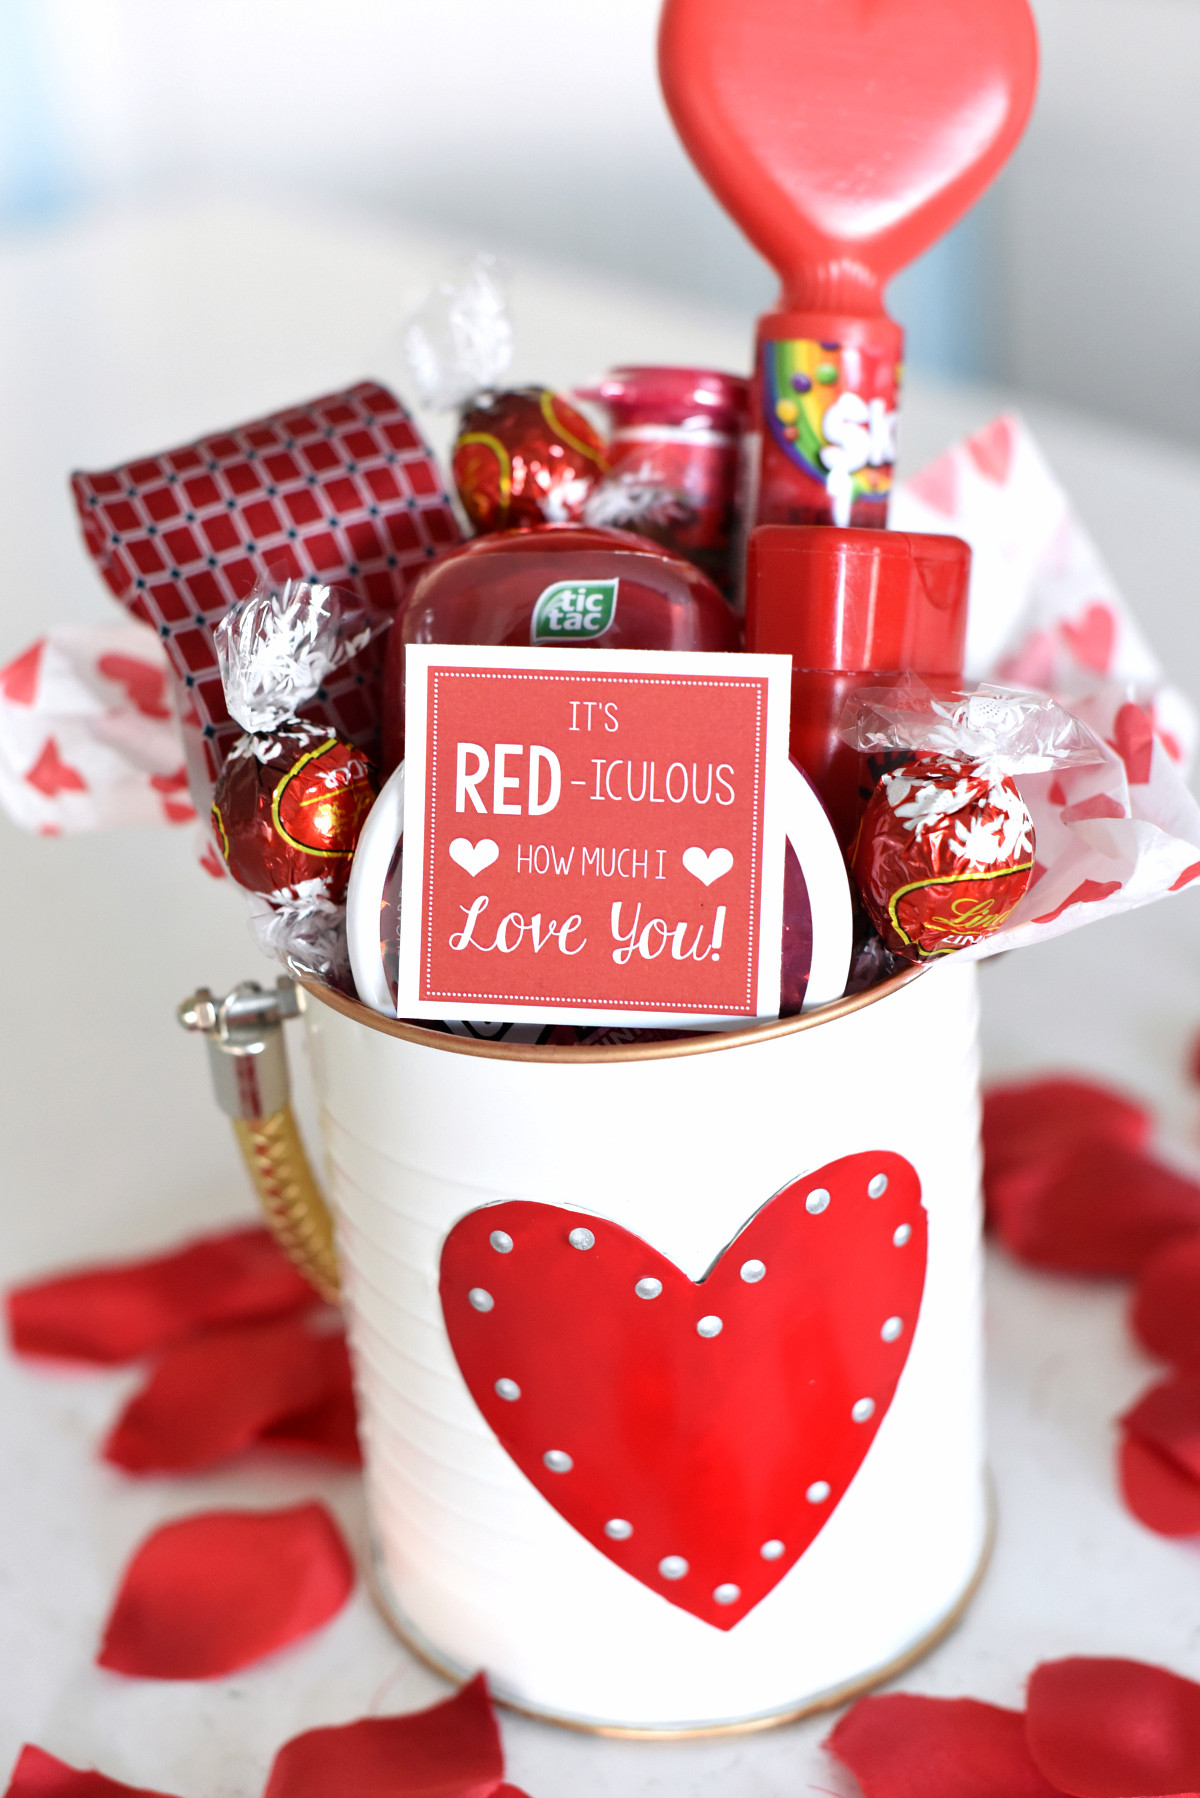 Valentines Day Gift Ideas For Husbands
 Cute Valentine s Day Gift Idea RED iculous Basket